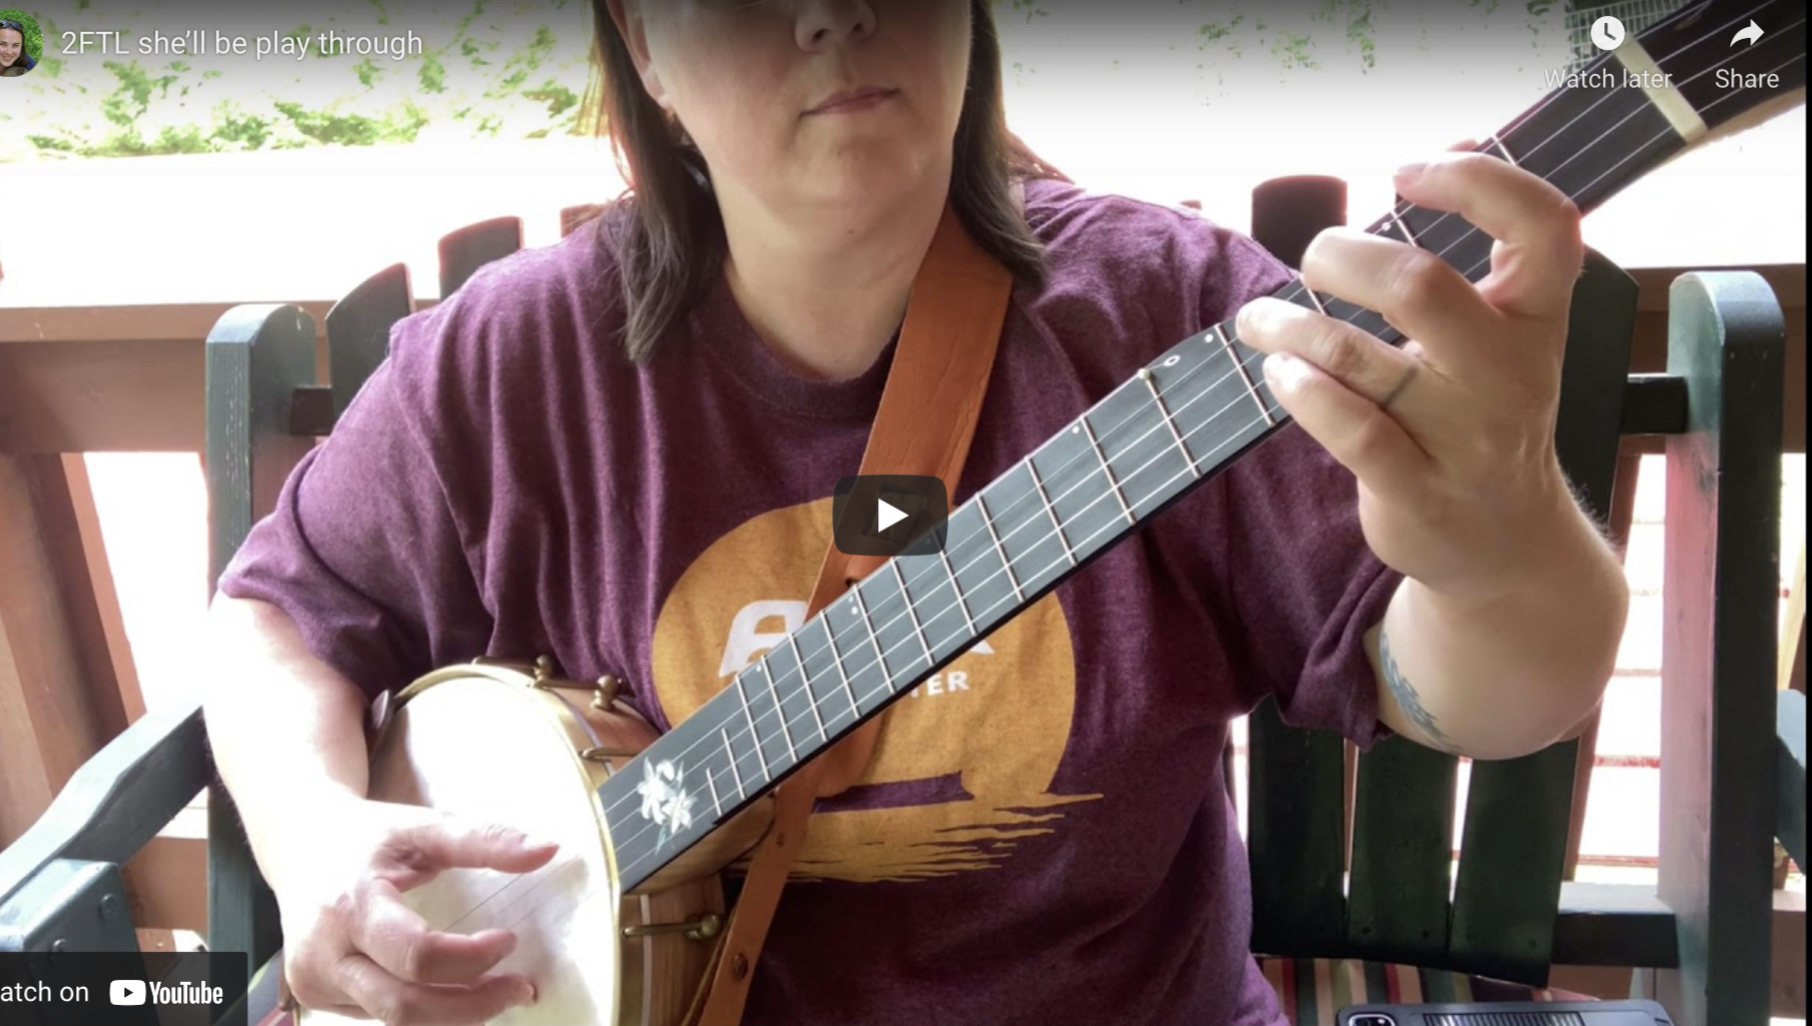 She’ll Be Comin’ Around The Mountain -2 Finger Banjo – 2FTL